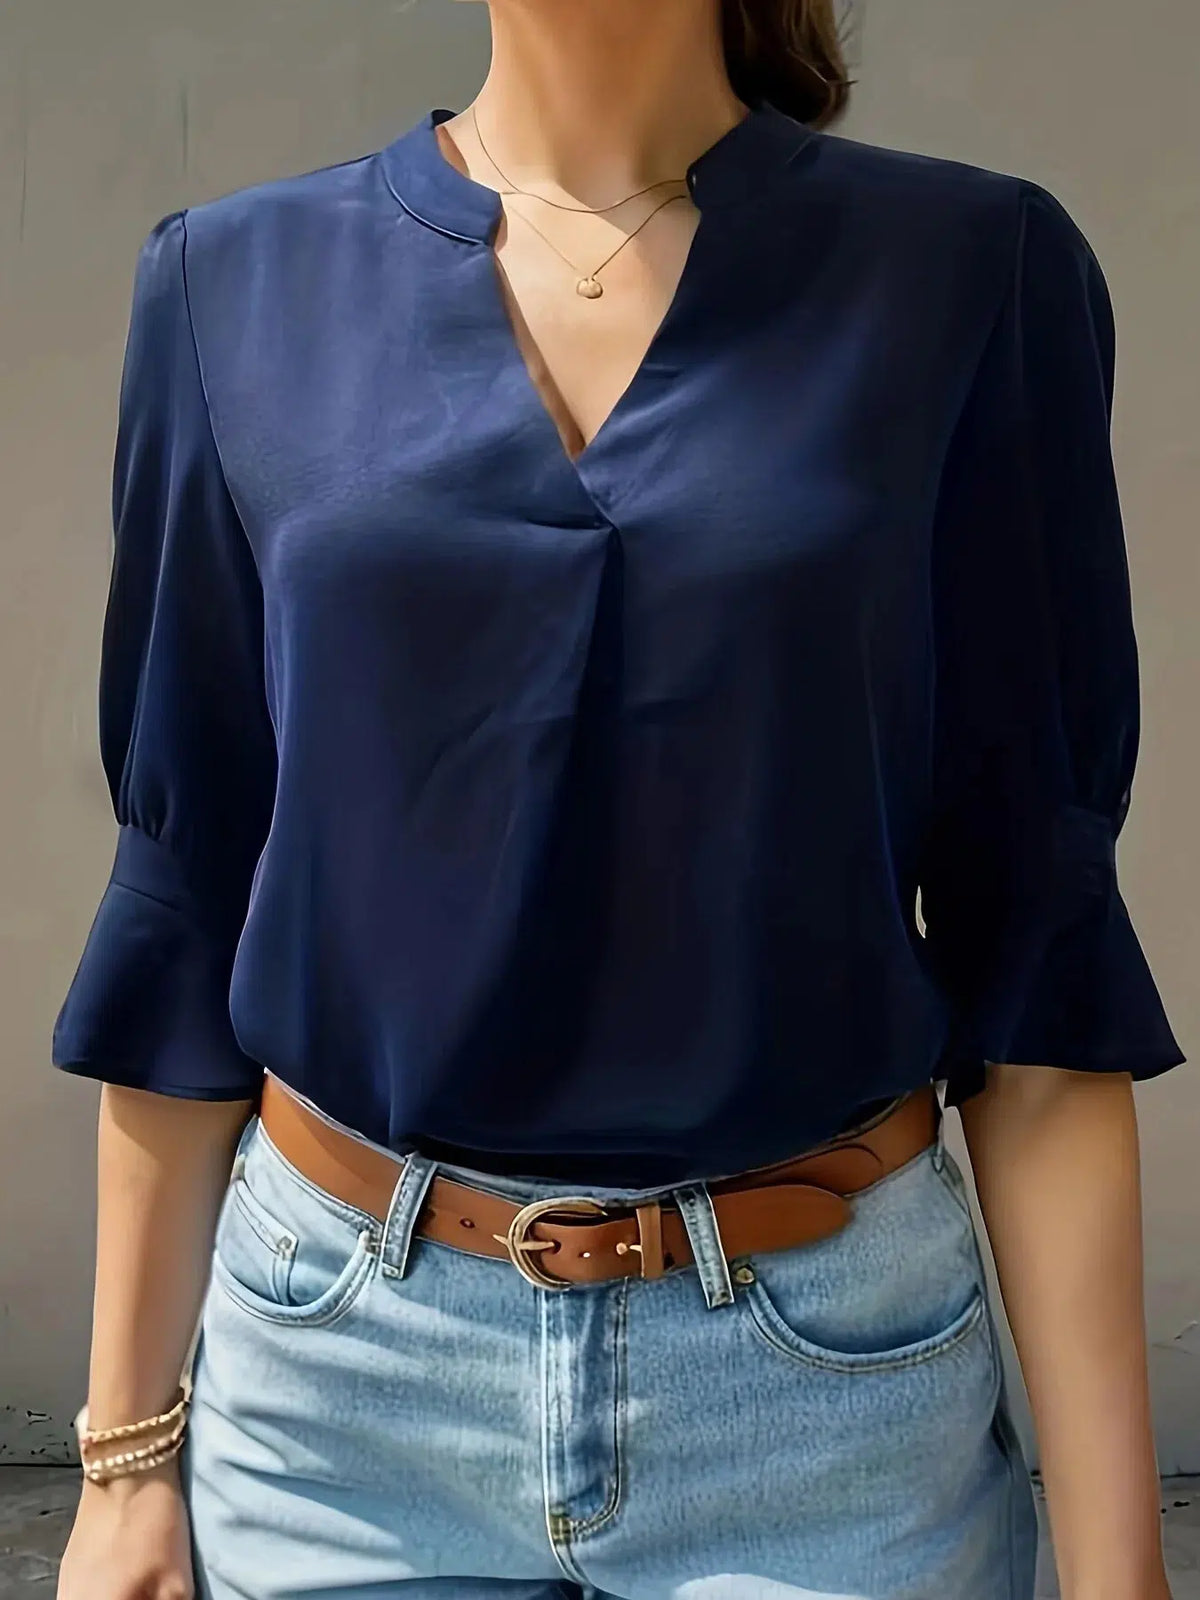 Women Fashion Solid Color Blouses Shirts Casual V Neck Tops-blouse-Bennys Beauty World